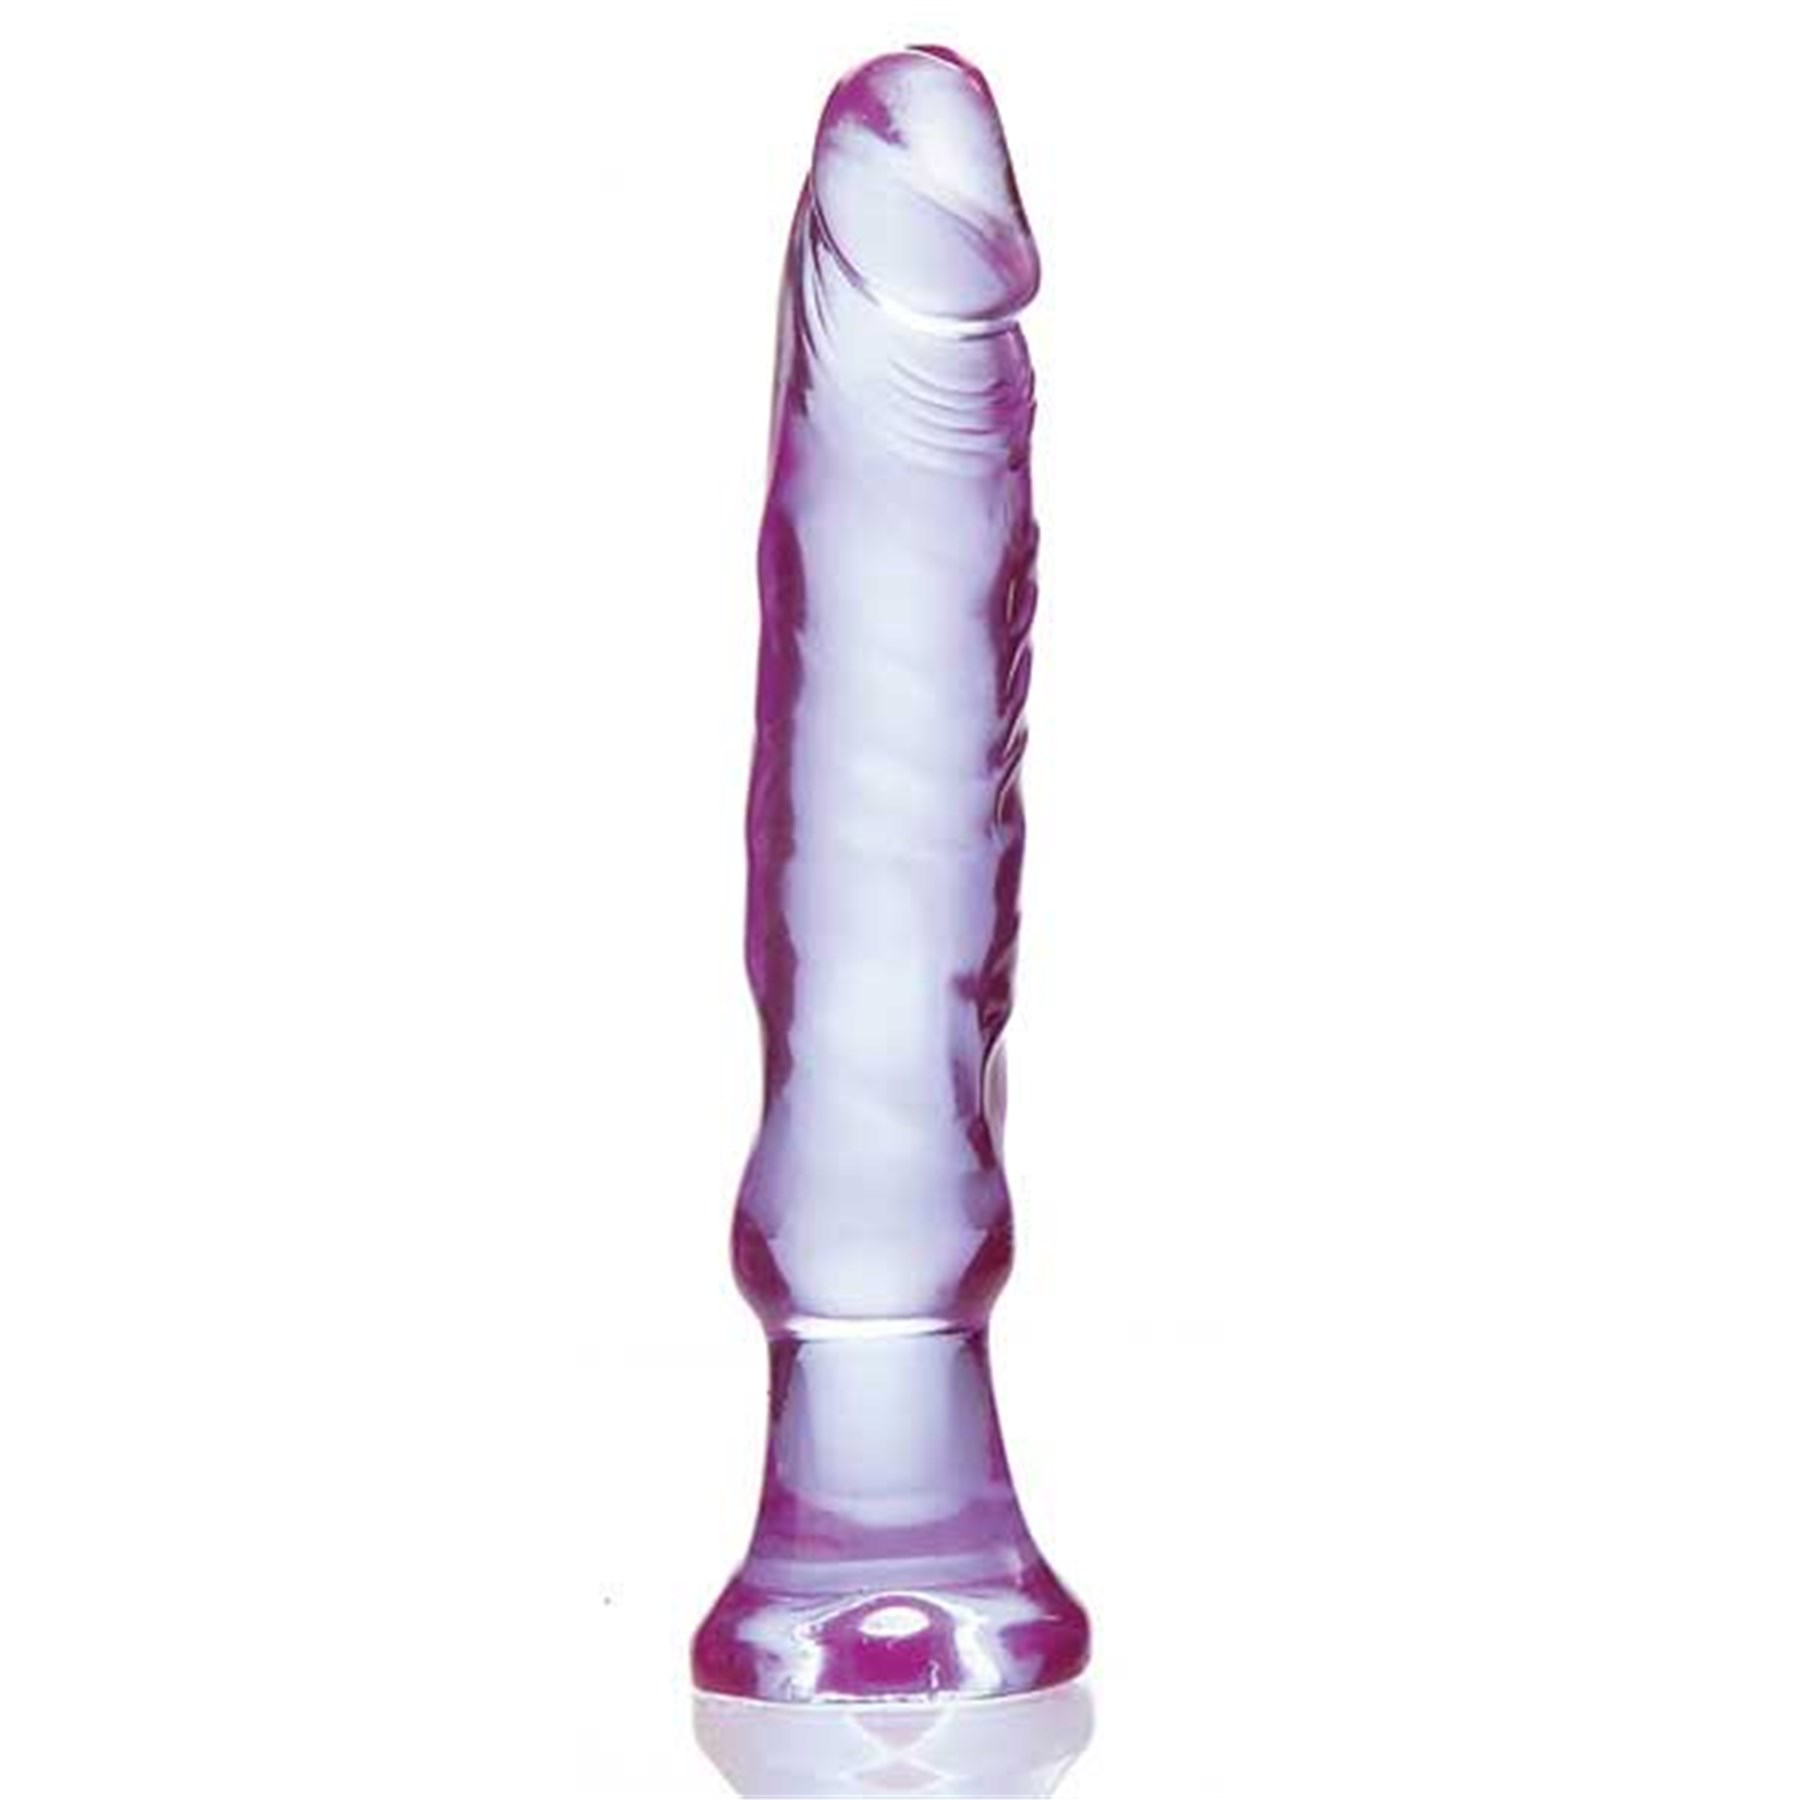 Anal Dildos Male Vibrator in Los Angeles